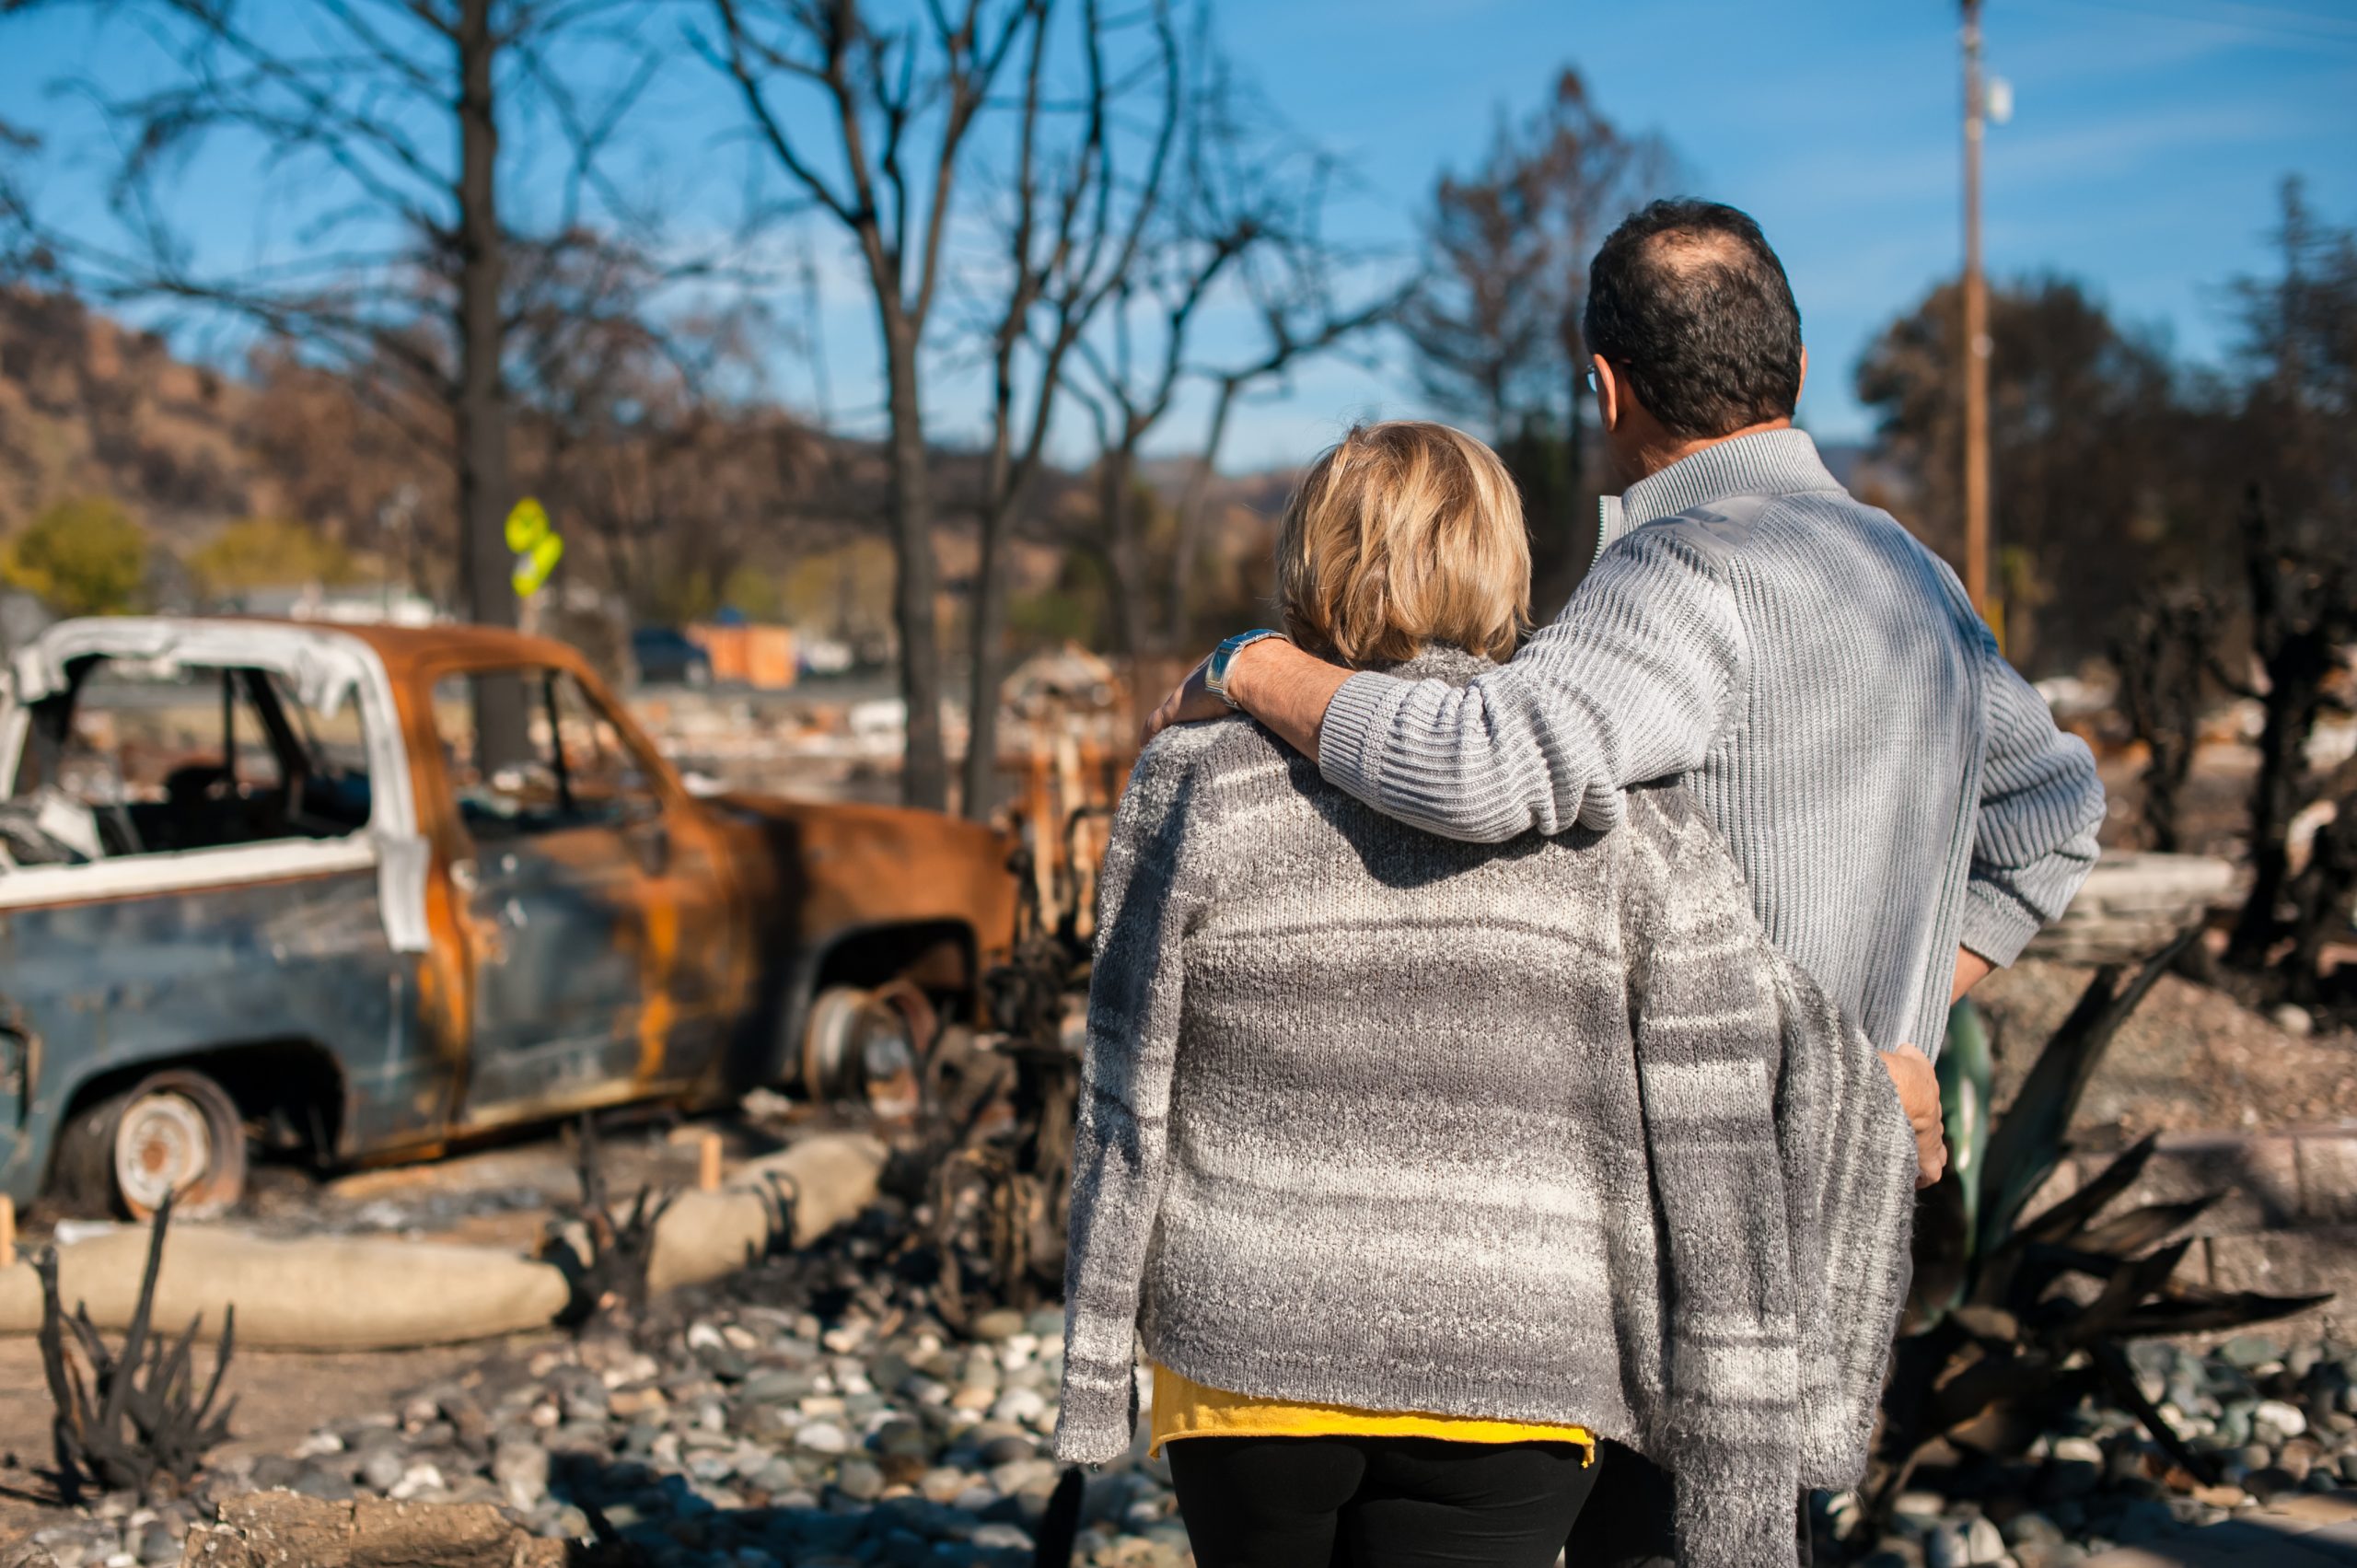 A man and woman standing together looking away from camera, with the man's arm over the woman's shoulder, as they look at a fire-damaged property including a burnt tree and pick up truck.